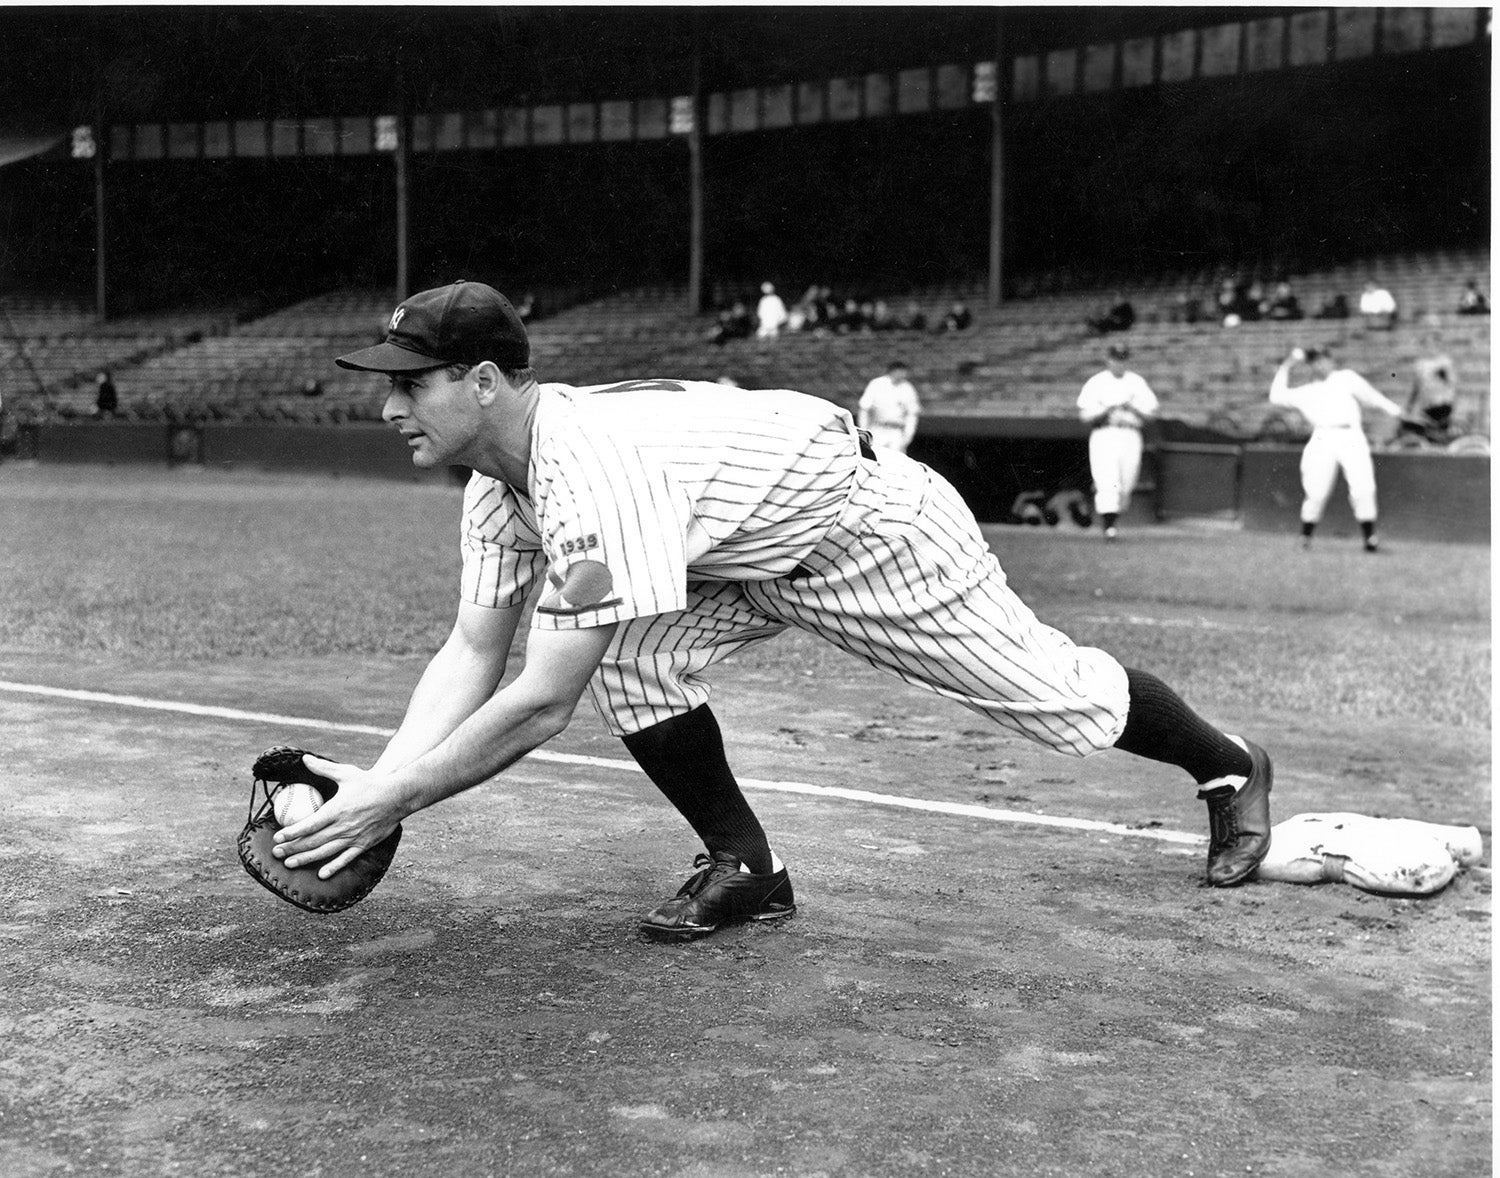 Lou Gehrig appears in his 2,000th consecutive game for the Yankees